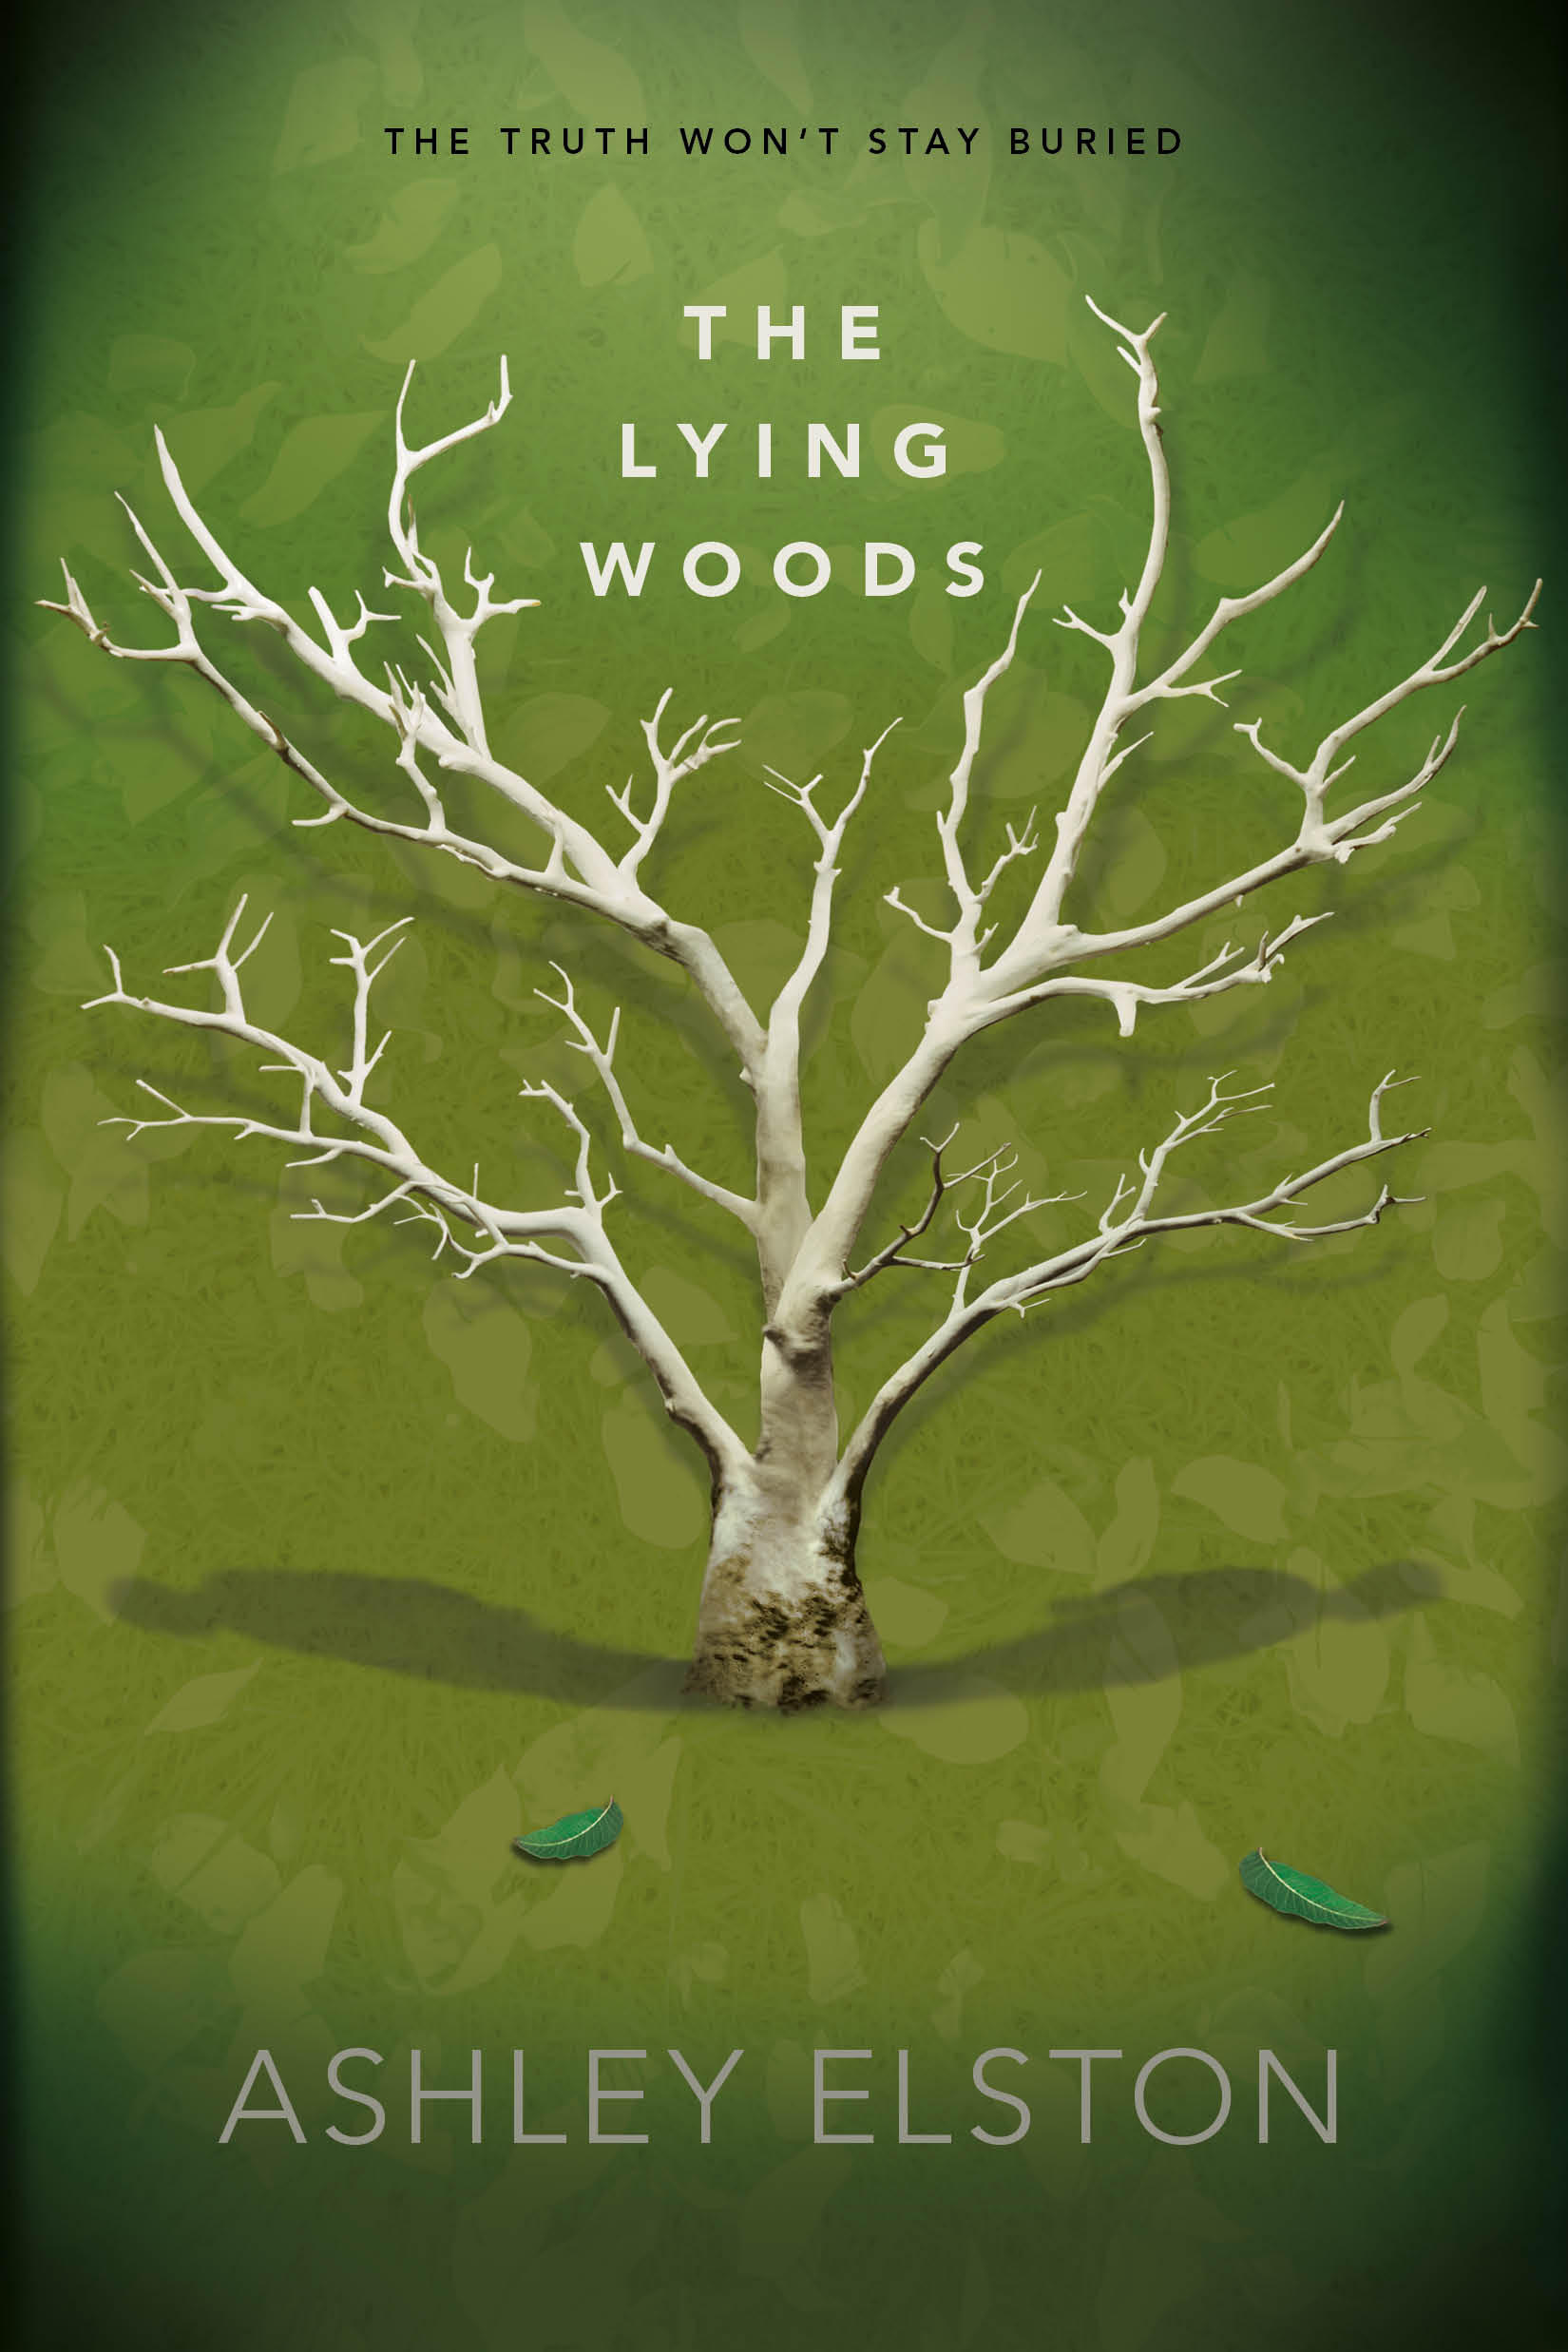 The Lying Woods by Ashley Elston | Hachette Book Group